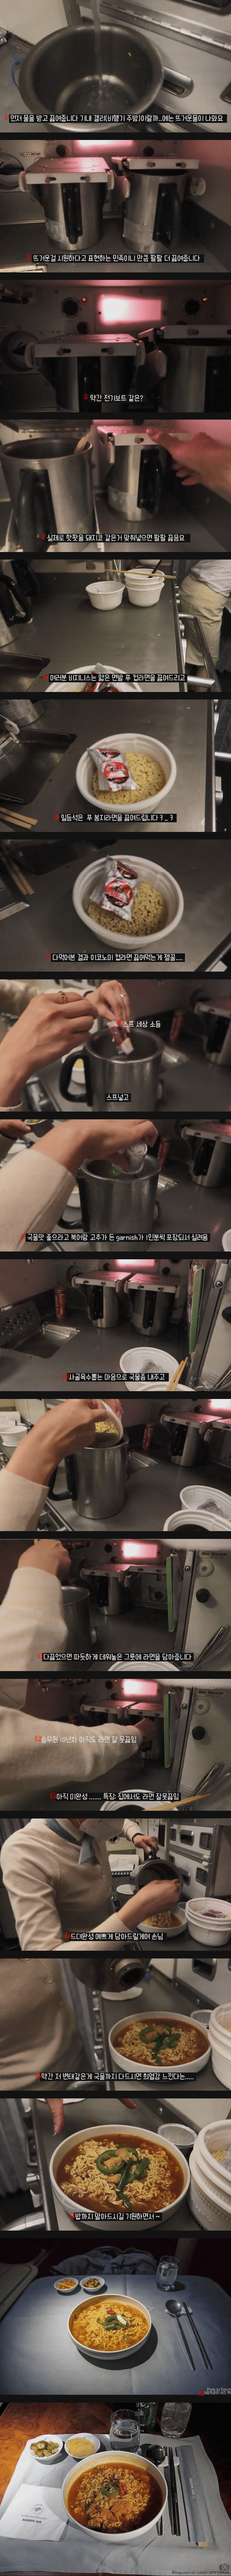 A flight attendant who cooks Korean Air's business class ramen, which is said to be a pervert.